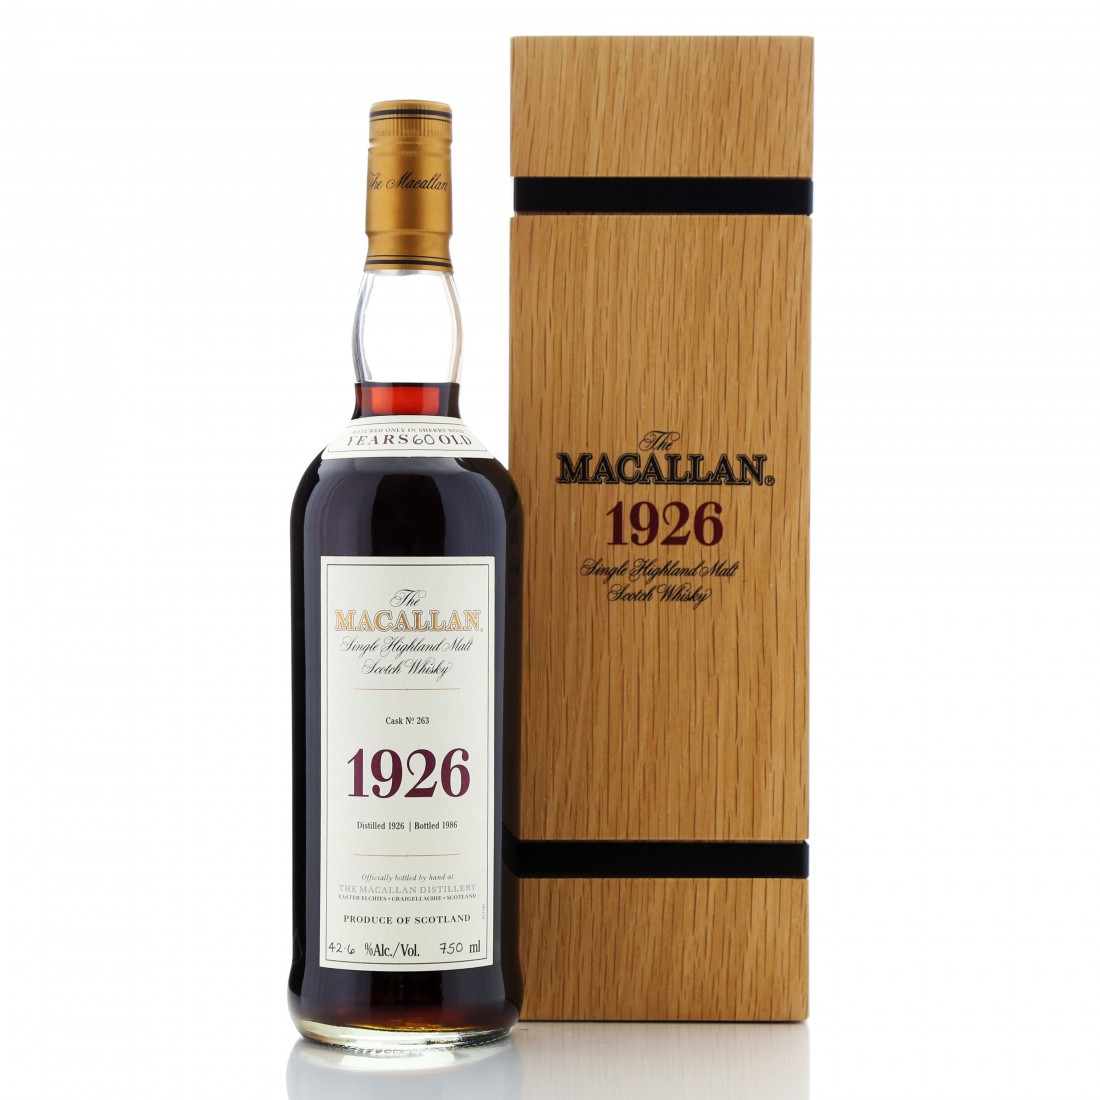 This Macallan 1926 60 Year Old Fine & Rare was sold via Whisky Auctioneer in 2020.